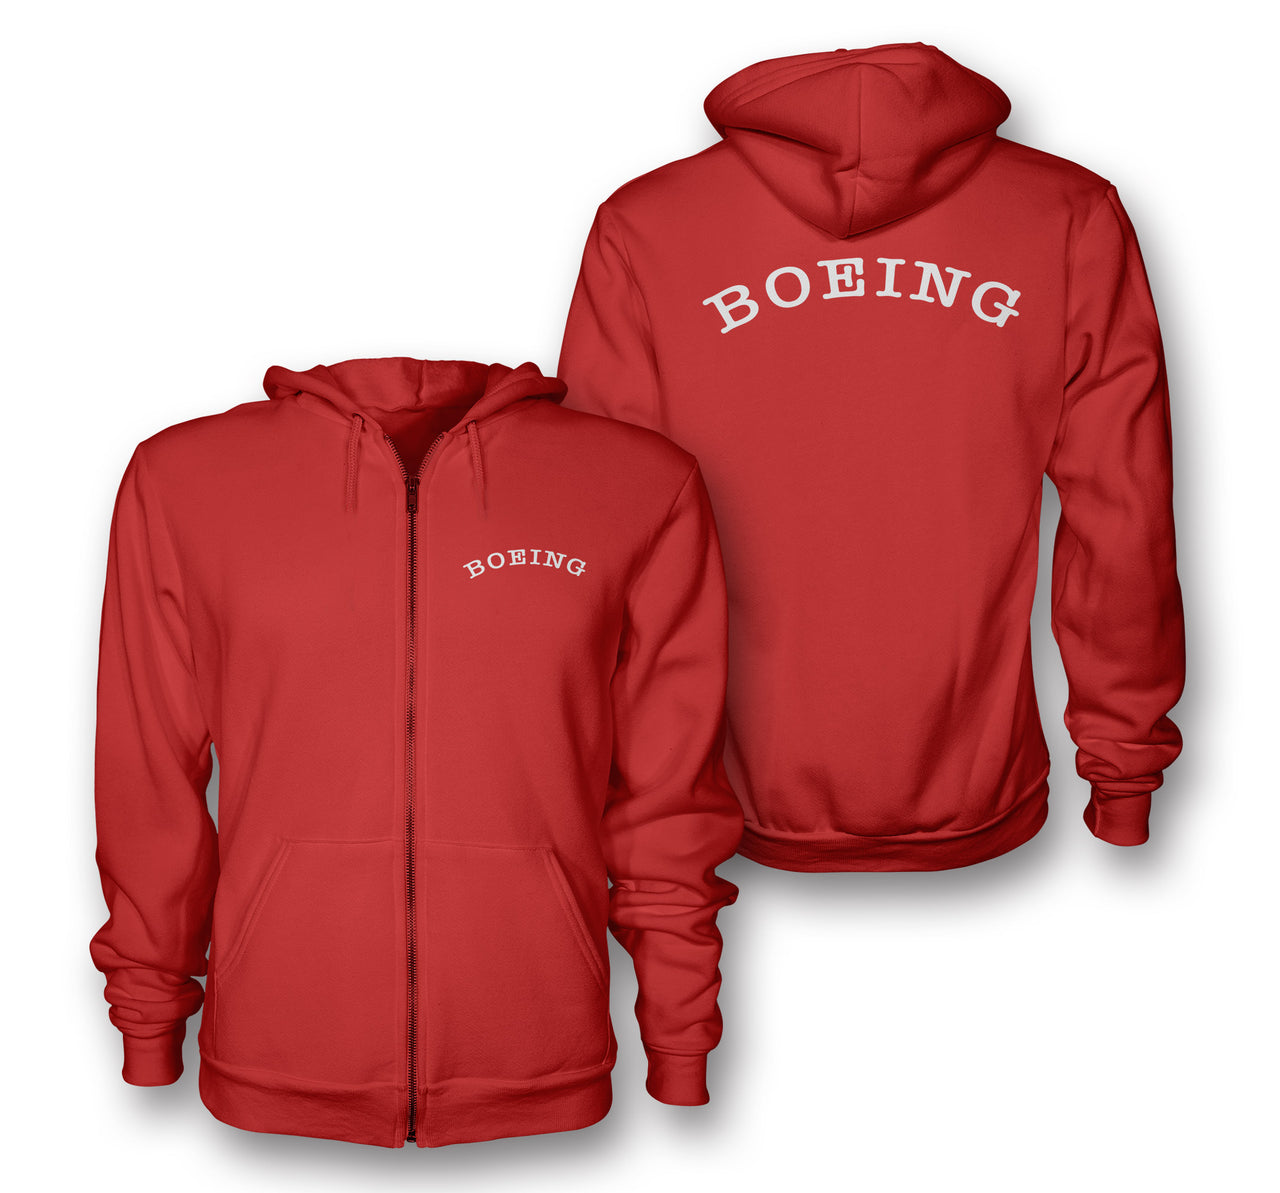 Special BOEING Text Designed Zipped Hoodies